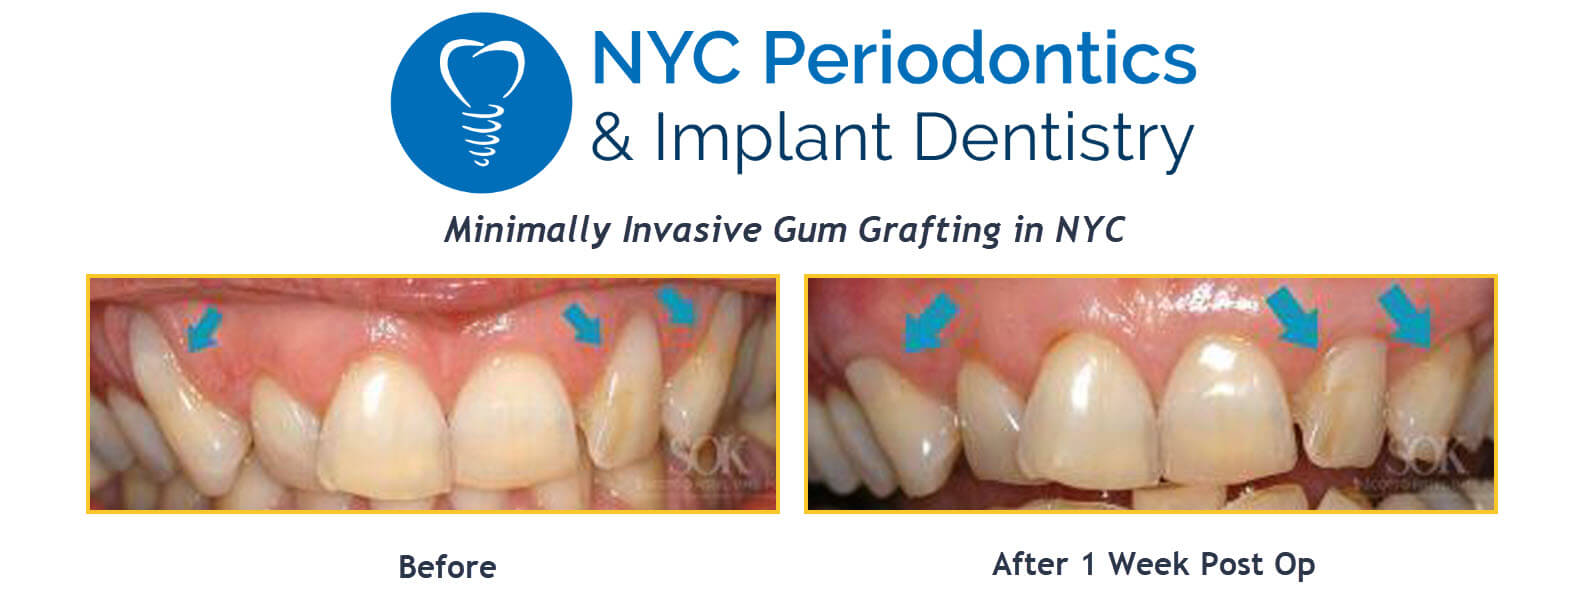 Before and after photos of gum grafting in NYC using microsurgery